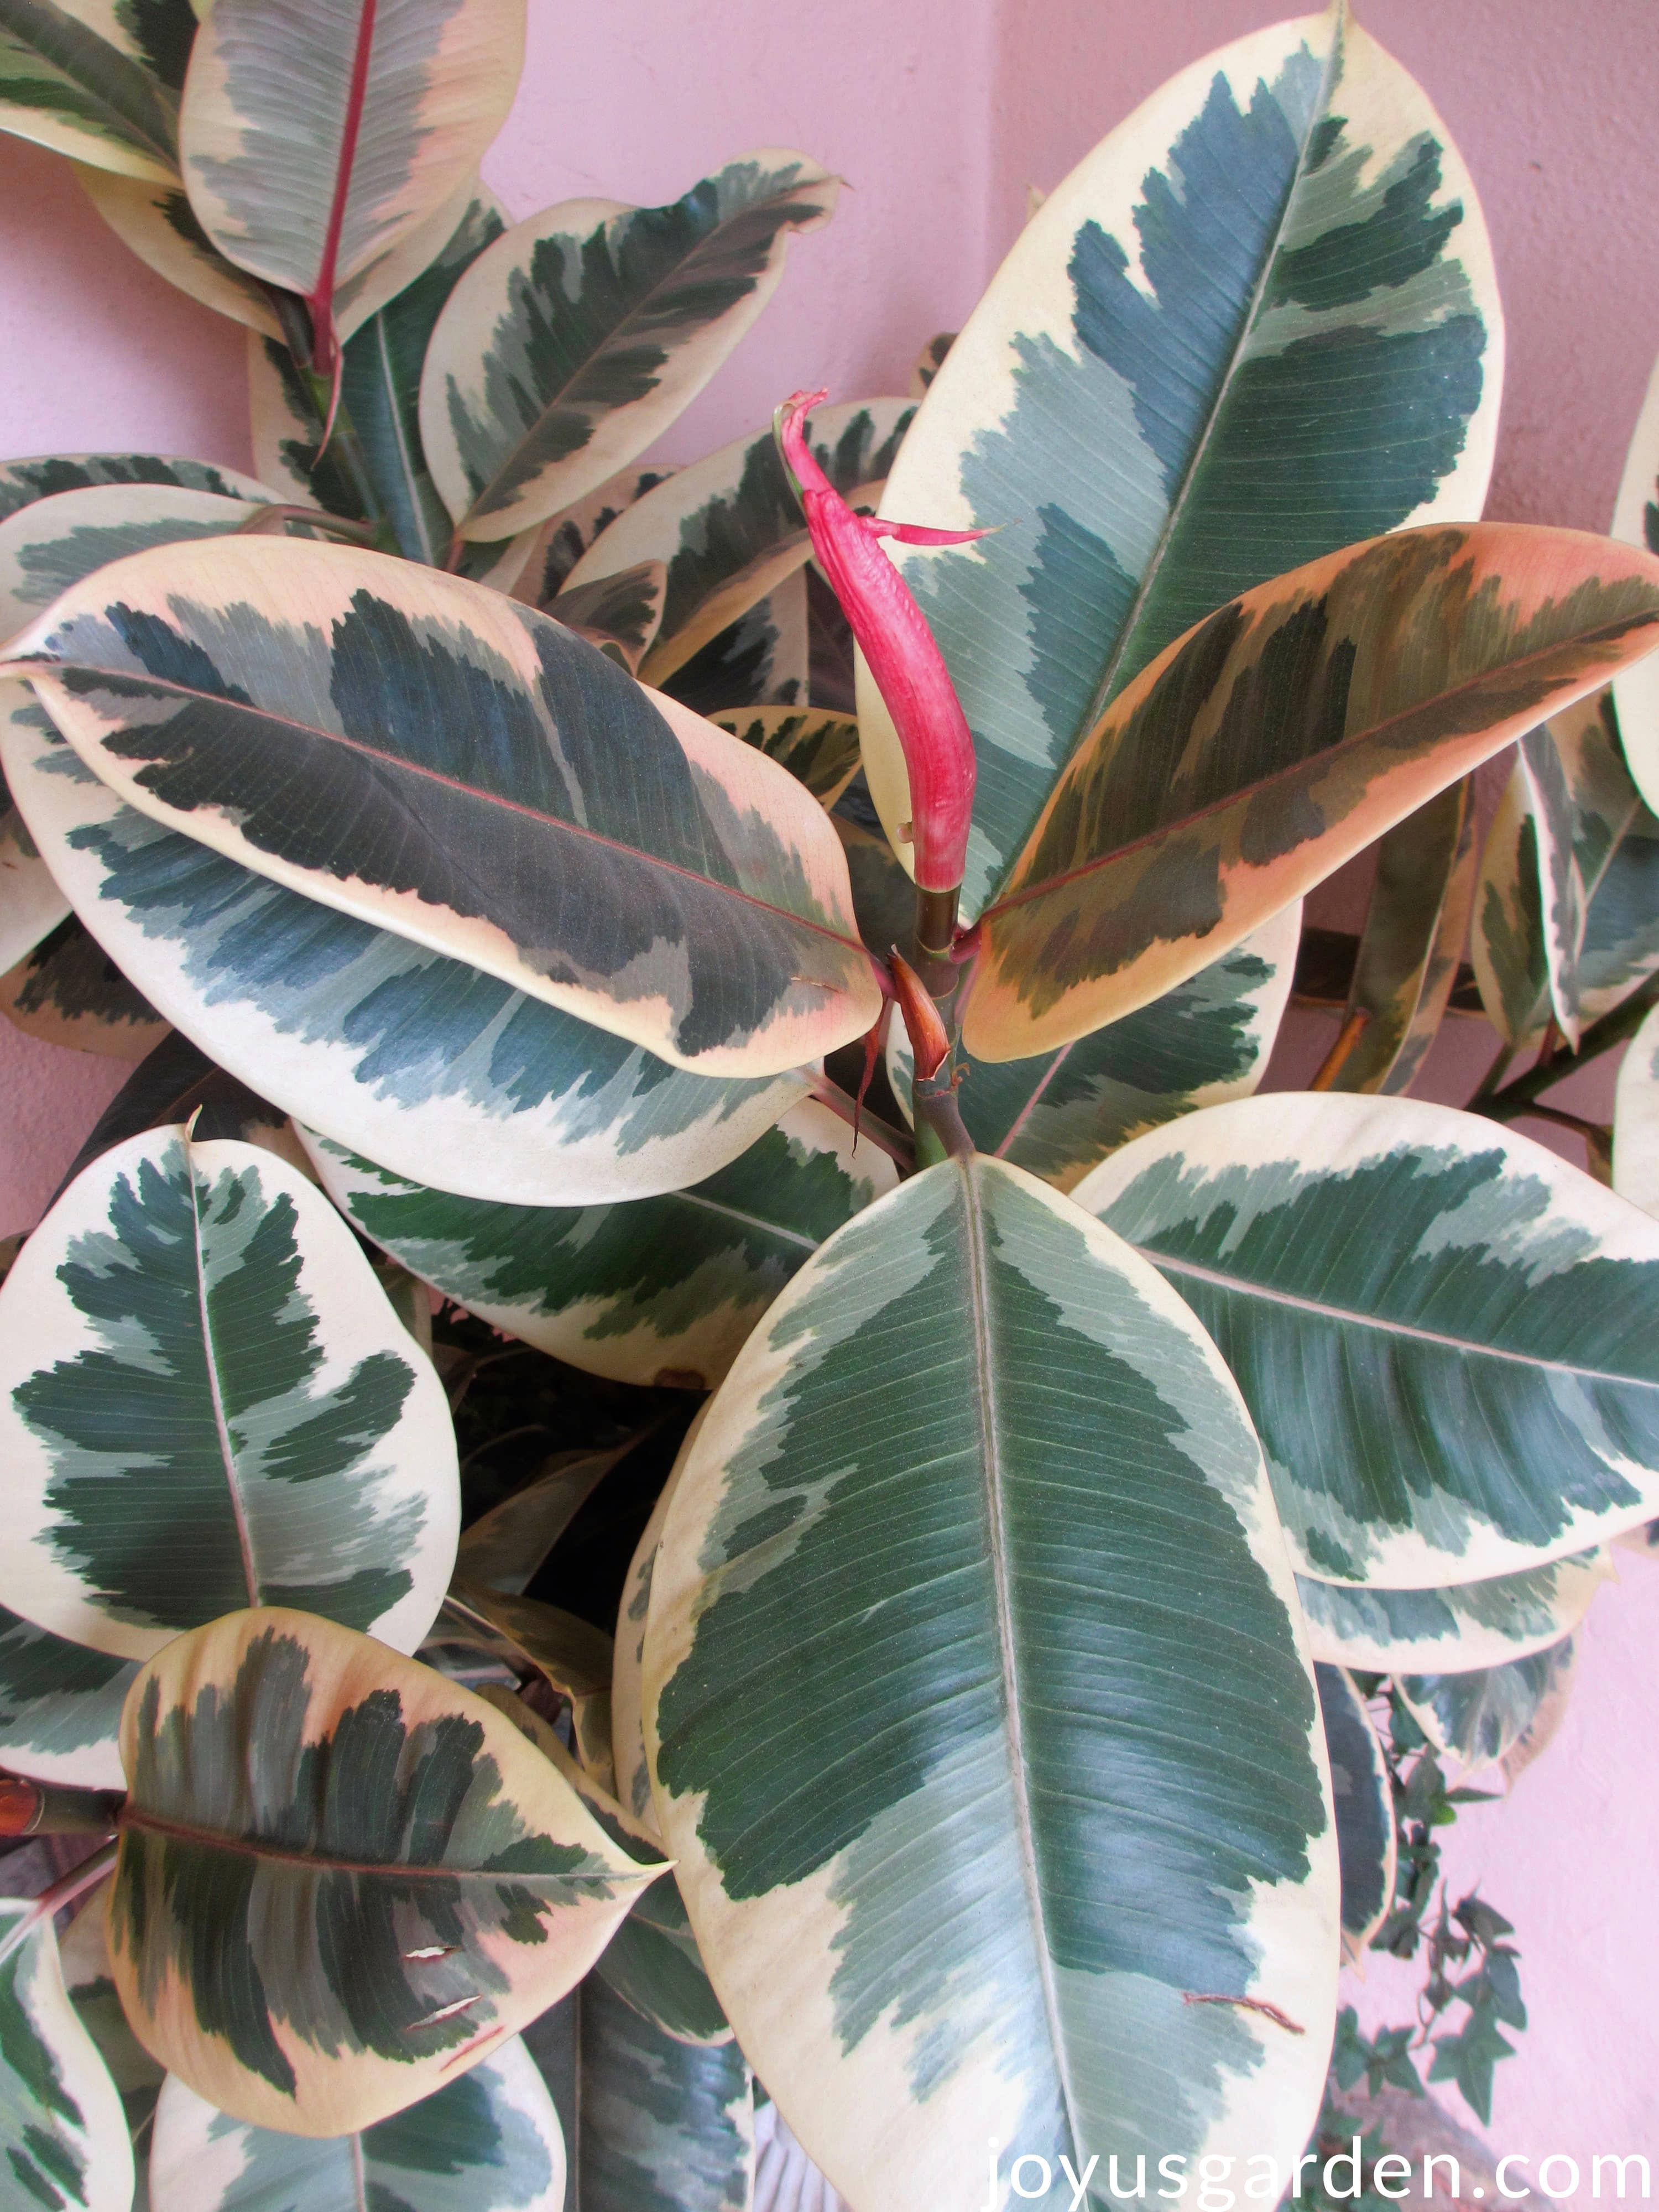 A close up of the large leaves of a ficus elastica variegata variegated rubber tree.